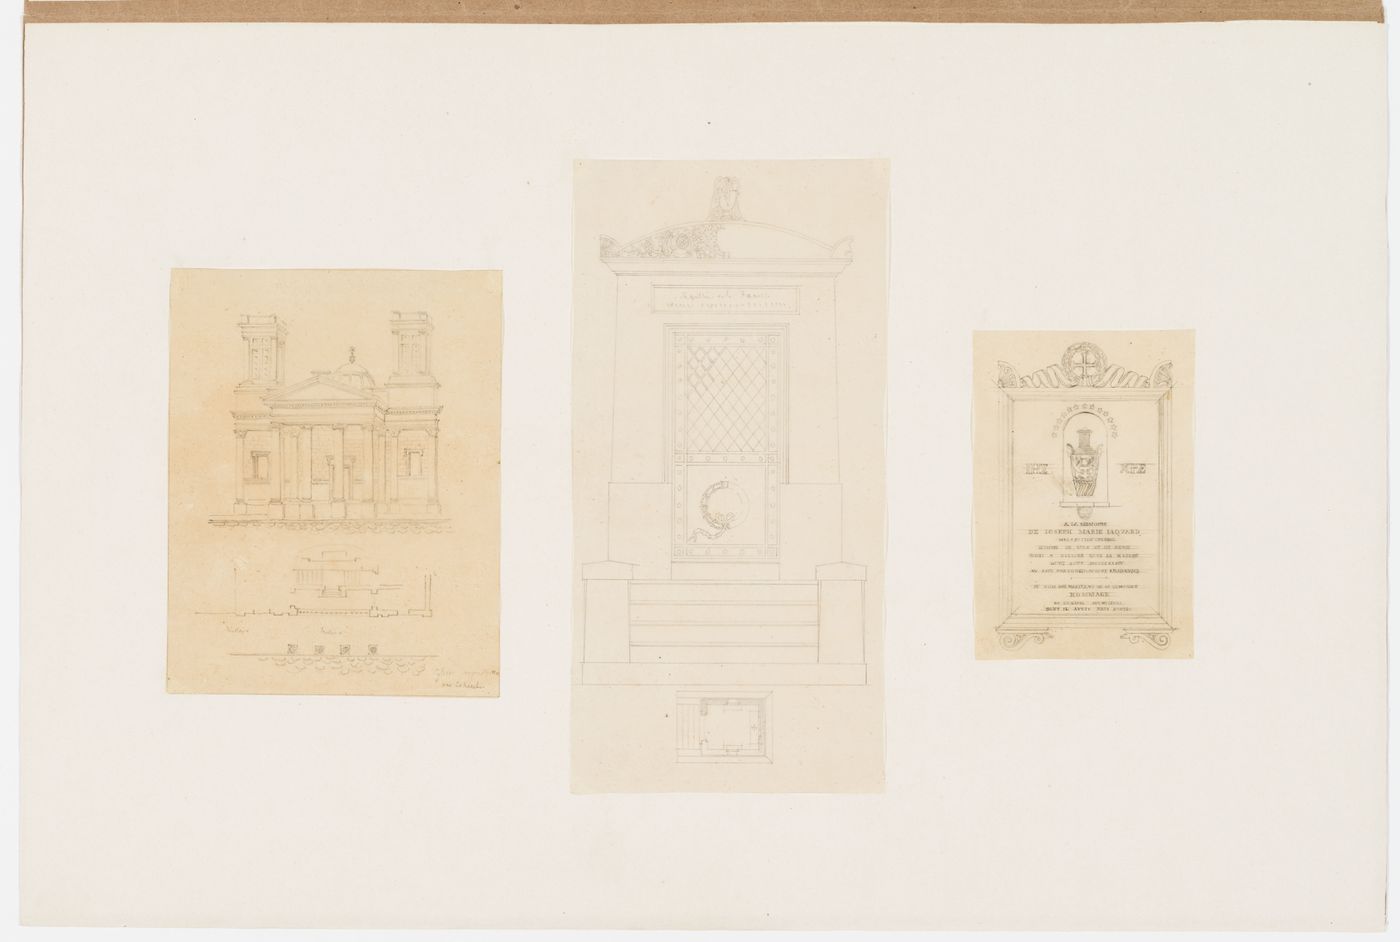 Front elevation and two partial plans of the Hanover Chapel, London, after C.R. Cockerell; Exterior elevation and ground plan of a sepulchral chapel; Elevation of a funerary plaque or tombstone dedicated to Joseph Marie Jaquard Mecanicien, 7 August 1834